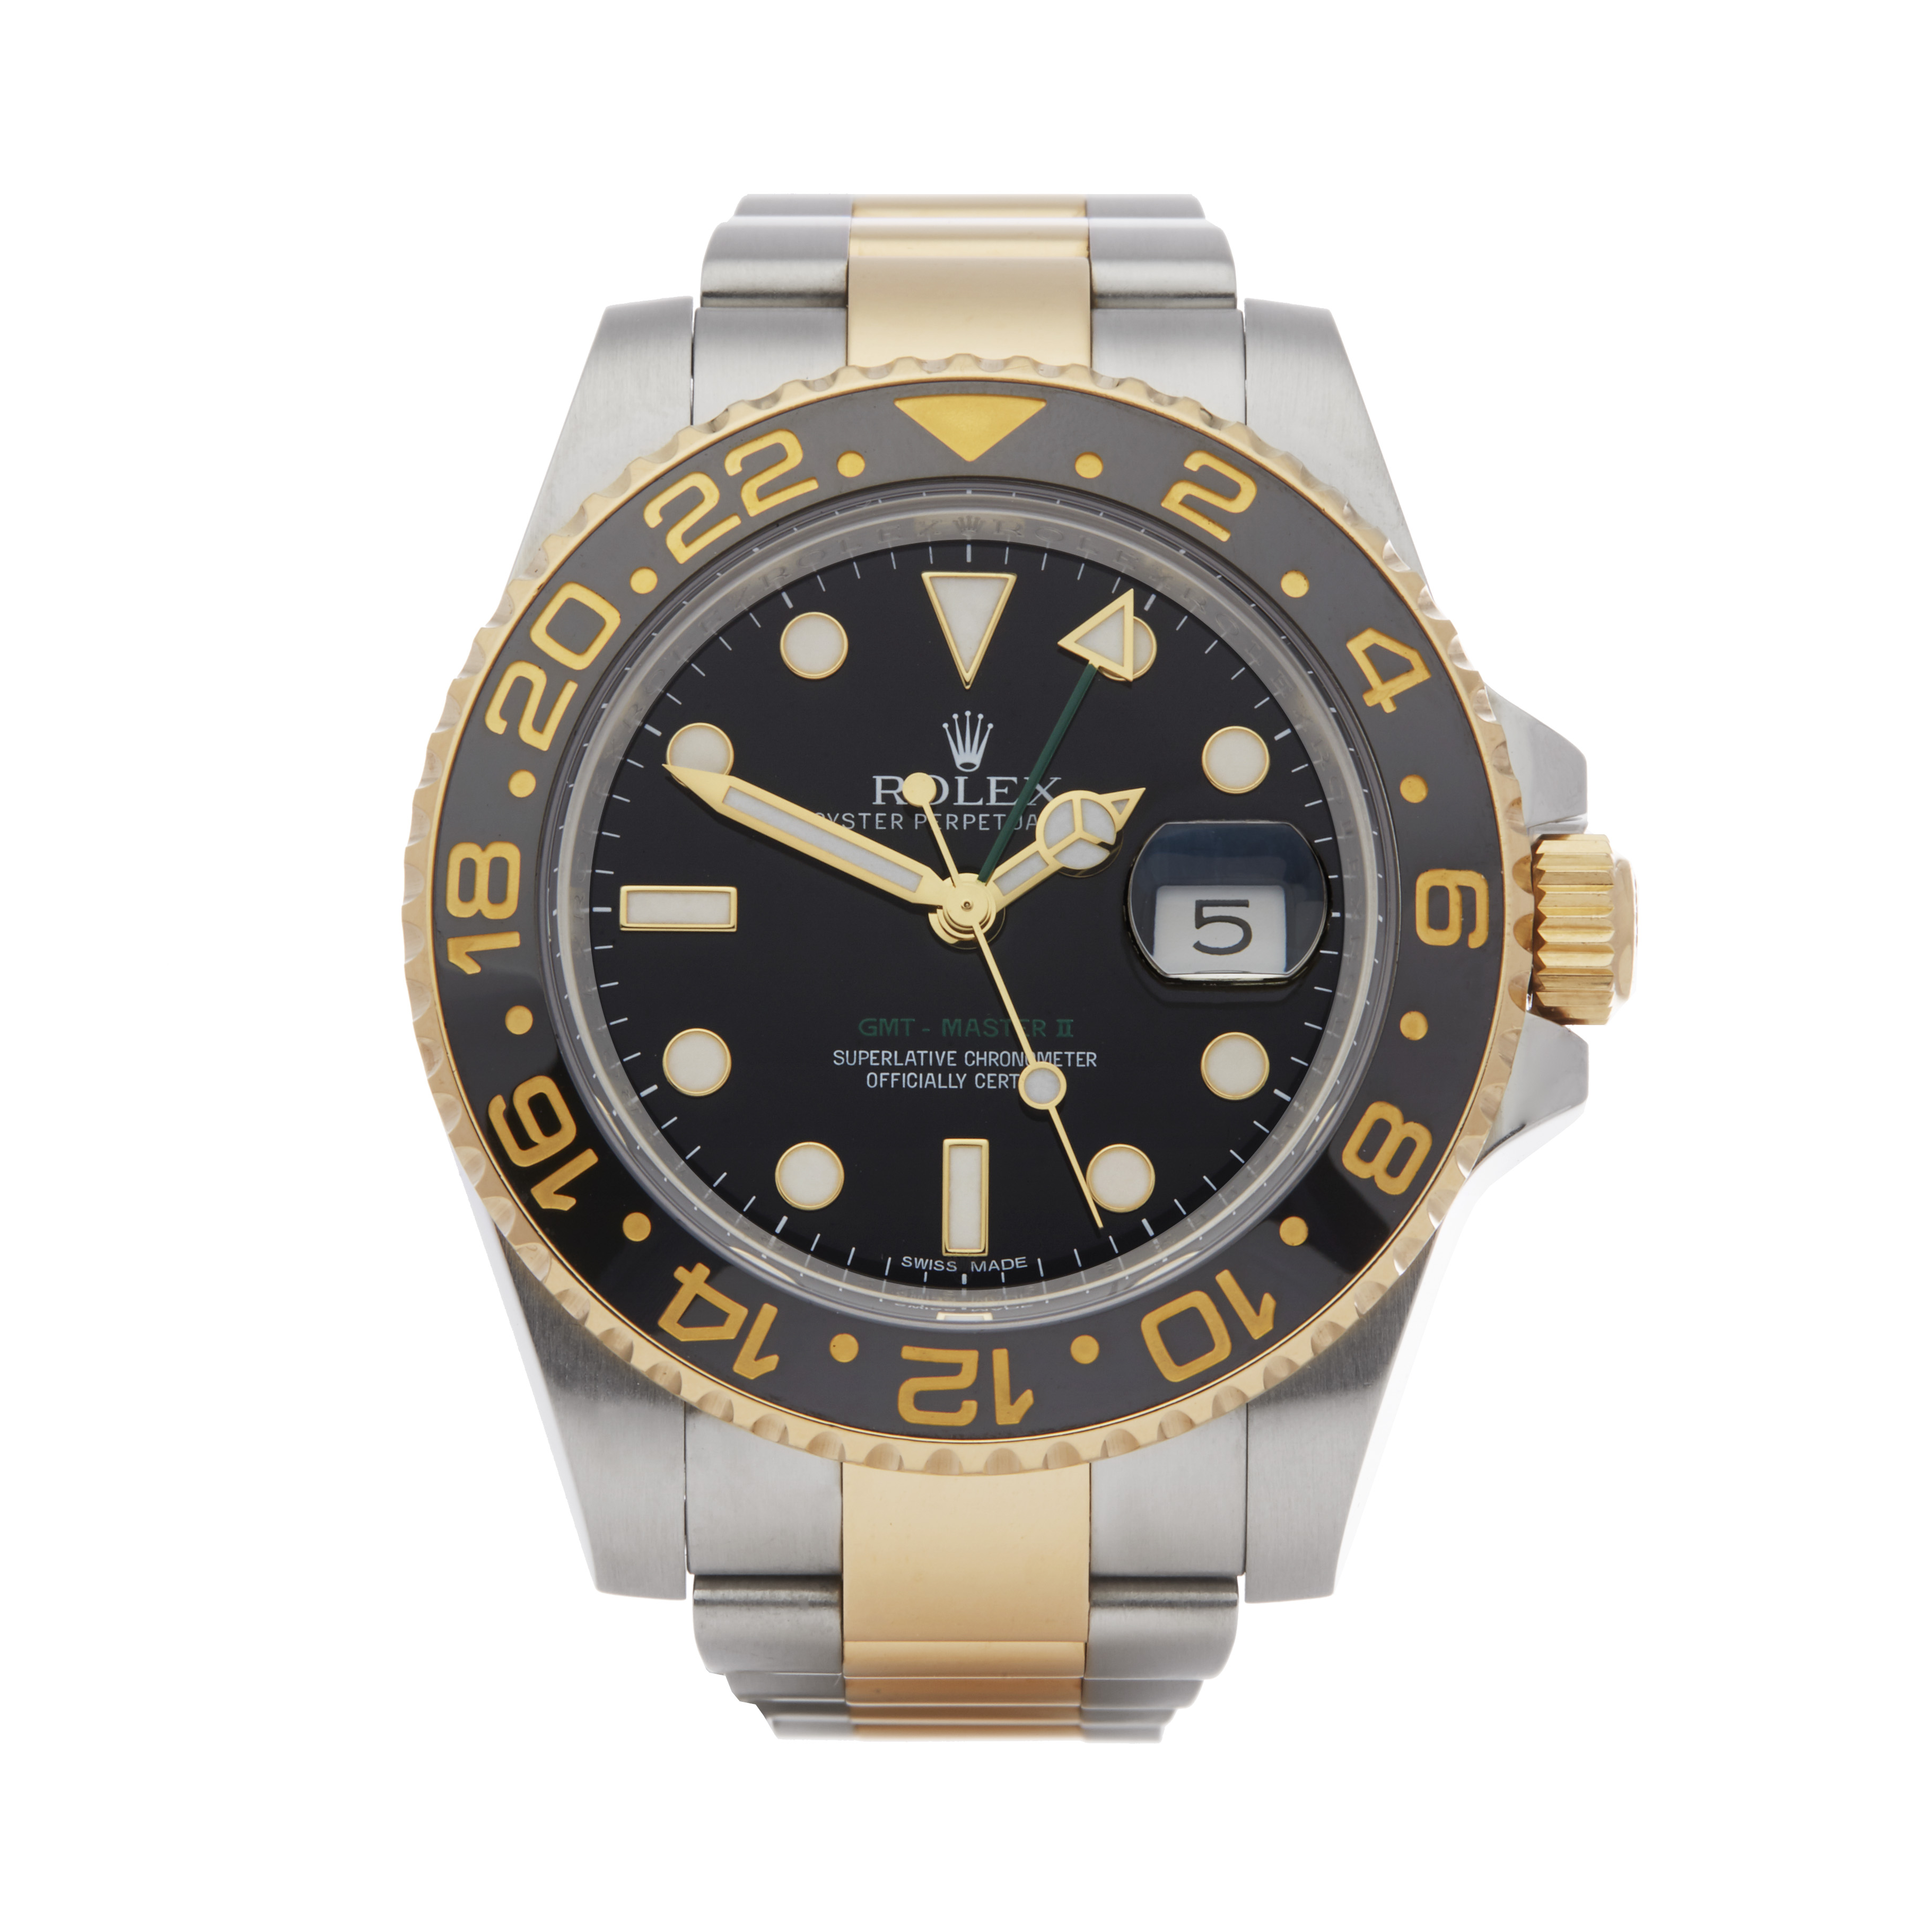 Rolex GMT-Master II 116713LN Men's Yellow Gold & Stainless Steel Watch - Image 9 of 9